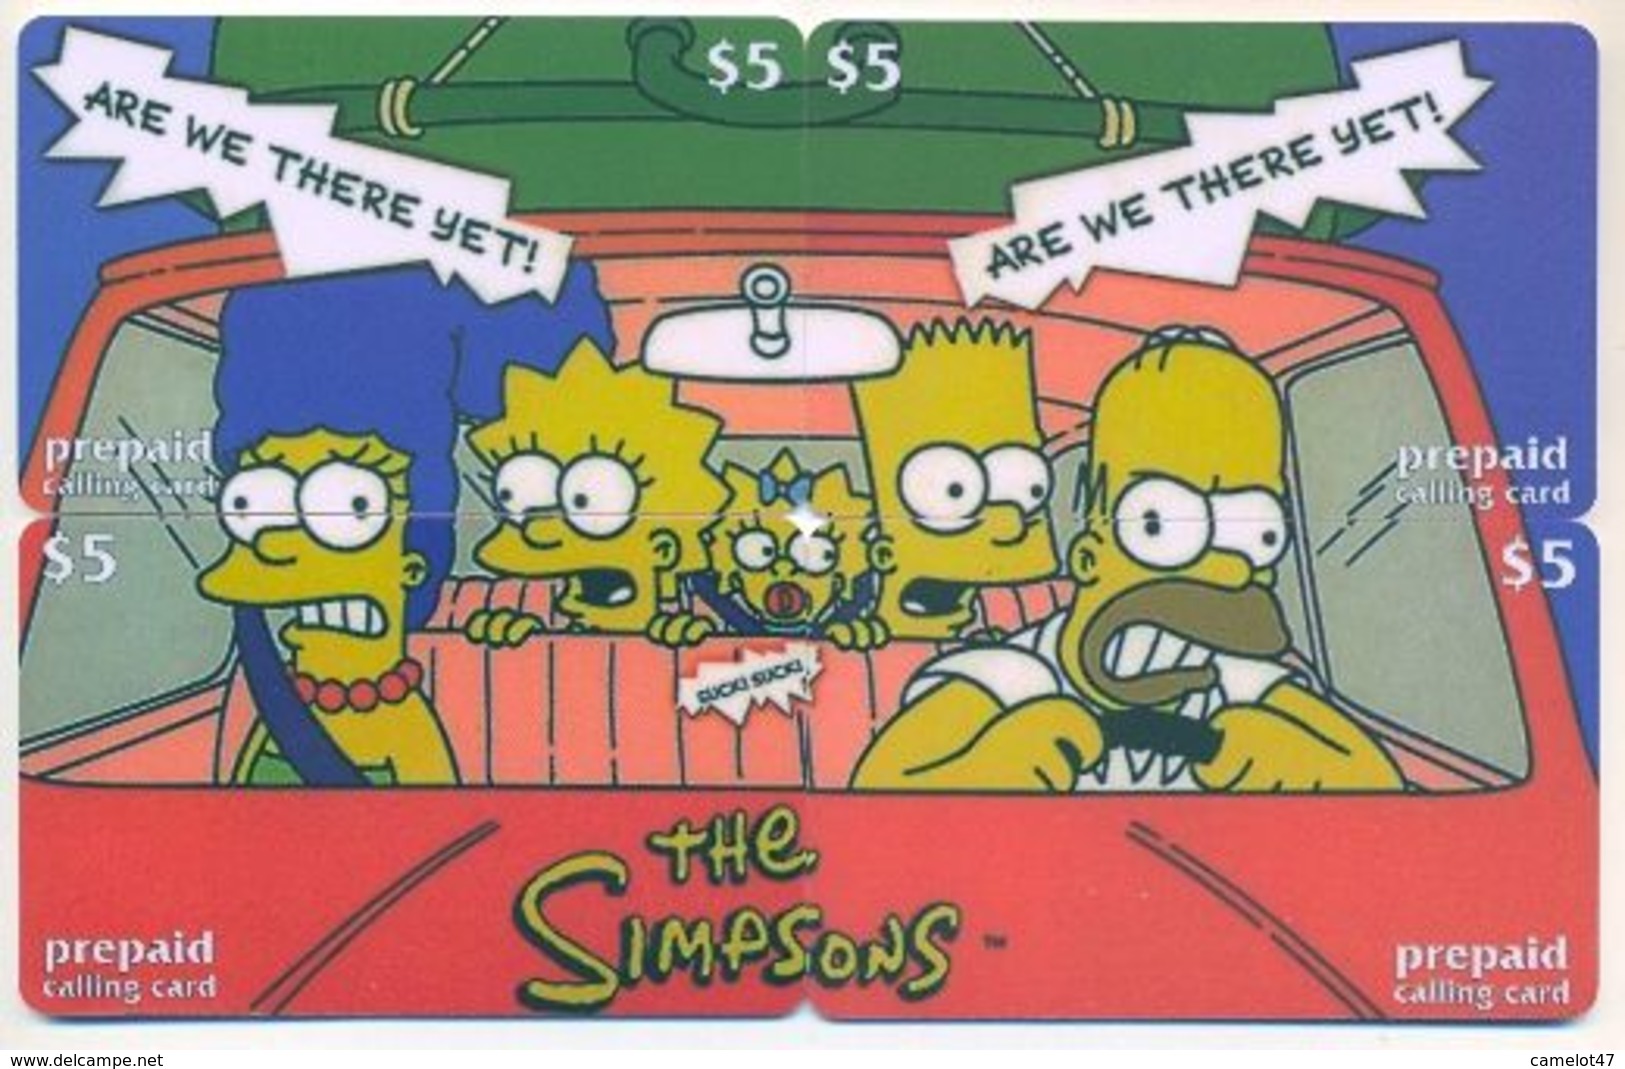 The Simpsons, $5, LDPC, 4 Prepaid Calling Cards, PROBABLY FAKE, # Simpsons-2 - Rompecabezas